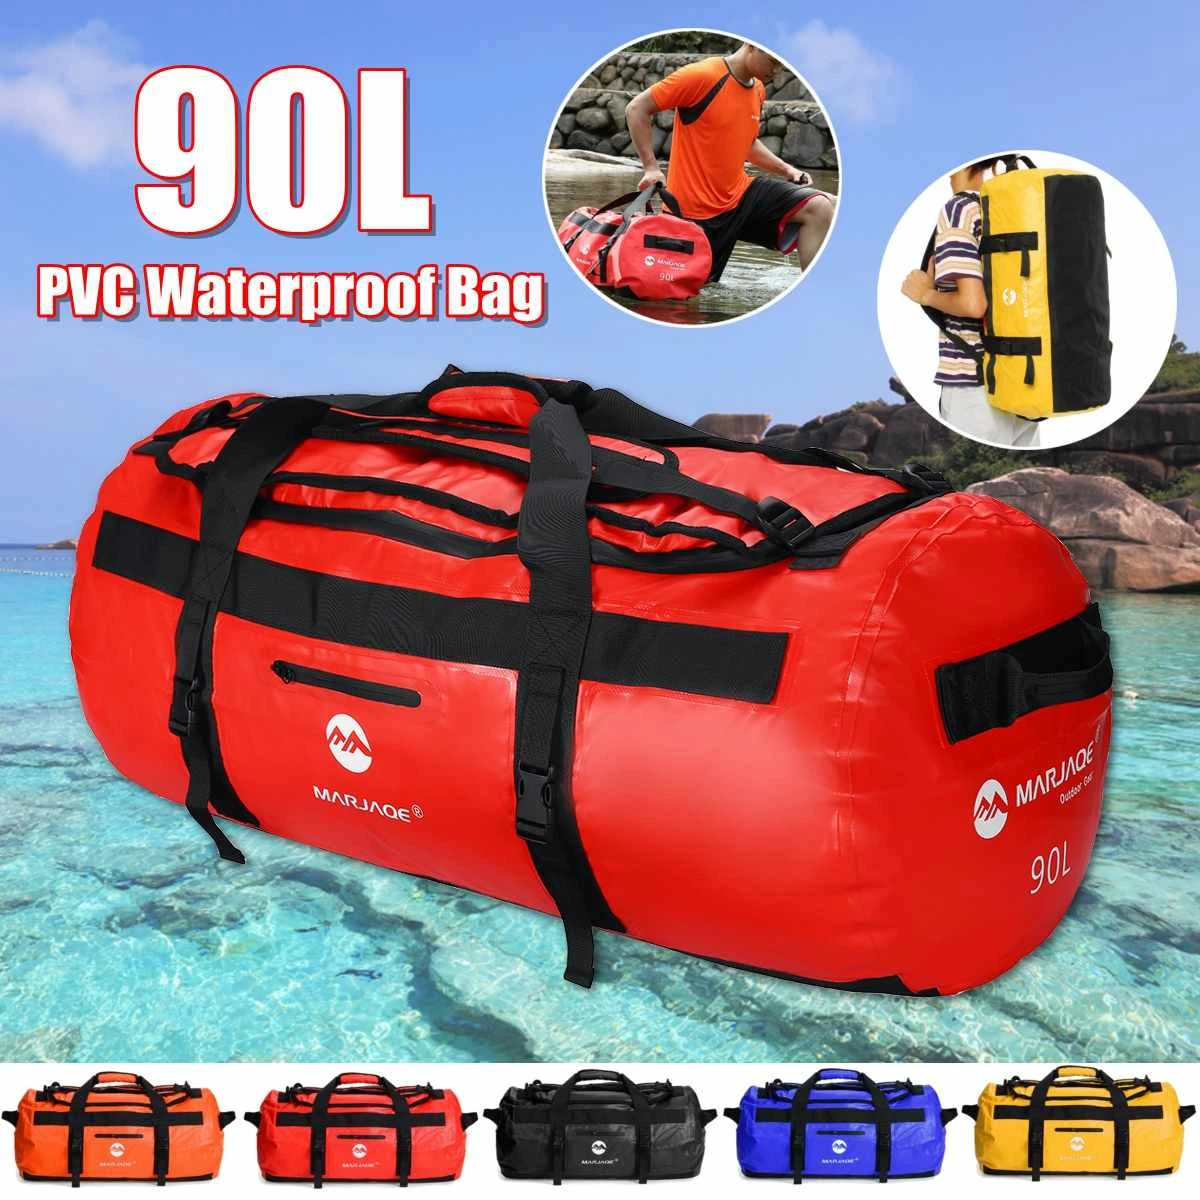 13 LTR X-LIGHT DRY SACK Red waterproof bag sailing boat yachting camping pouch